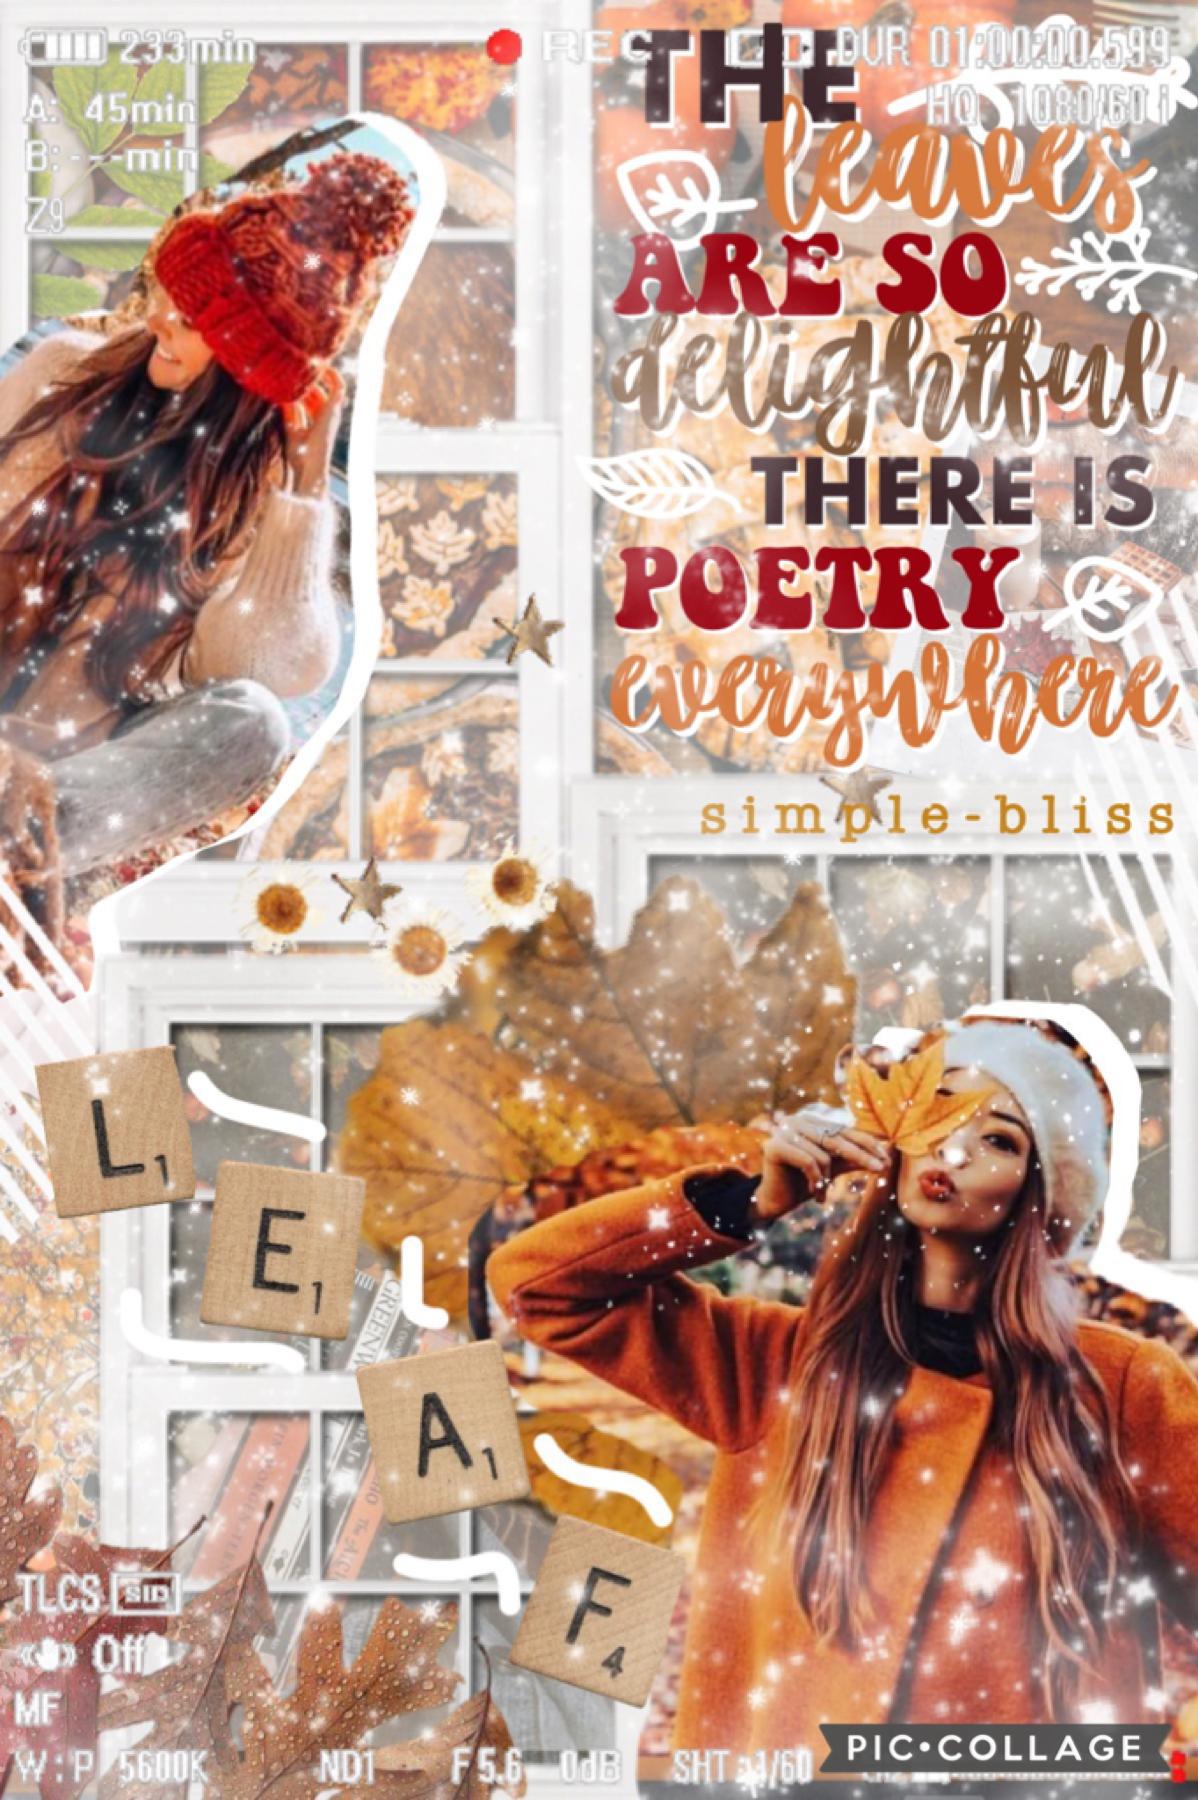 🍂9•18•22🍂 (TAP)
Eek it’s not technically the 18th where I live but I made too many fall collages so I just HAD to post, haha 😂 
𝚛𝚎𝚖𝚒𝚗𝚍𝚎𝚛: You’re beautiful!✨🫧 Drink more water 💦 and breathe! 🍃 
Bg inspired by @stormyskies
Text inspired by ME! 😆 
QOTD: opin